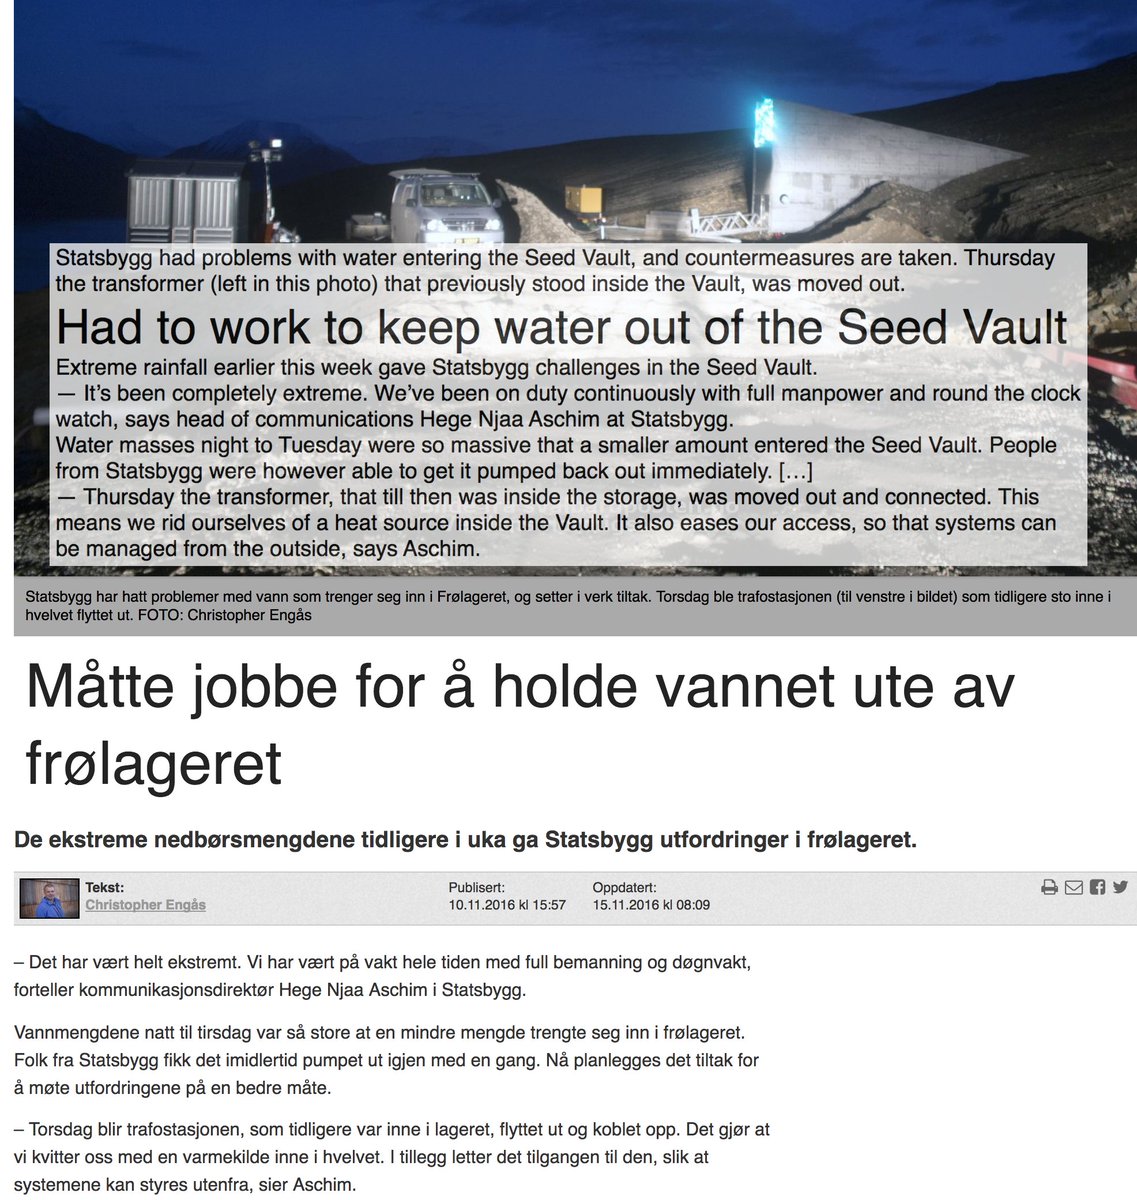 @MichaelEMann seems ill-informed about flooding of the Global #SeedVault. Doesn’t he read Norwegian local newspapers?
#FloodGate